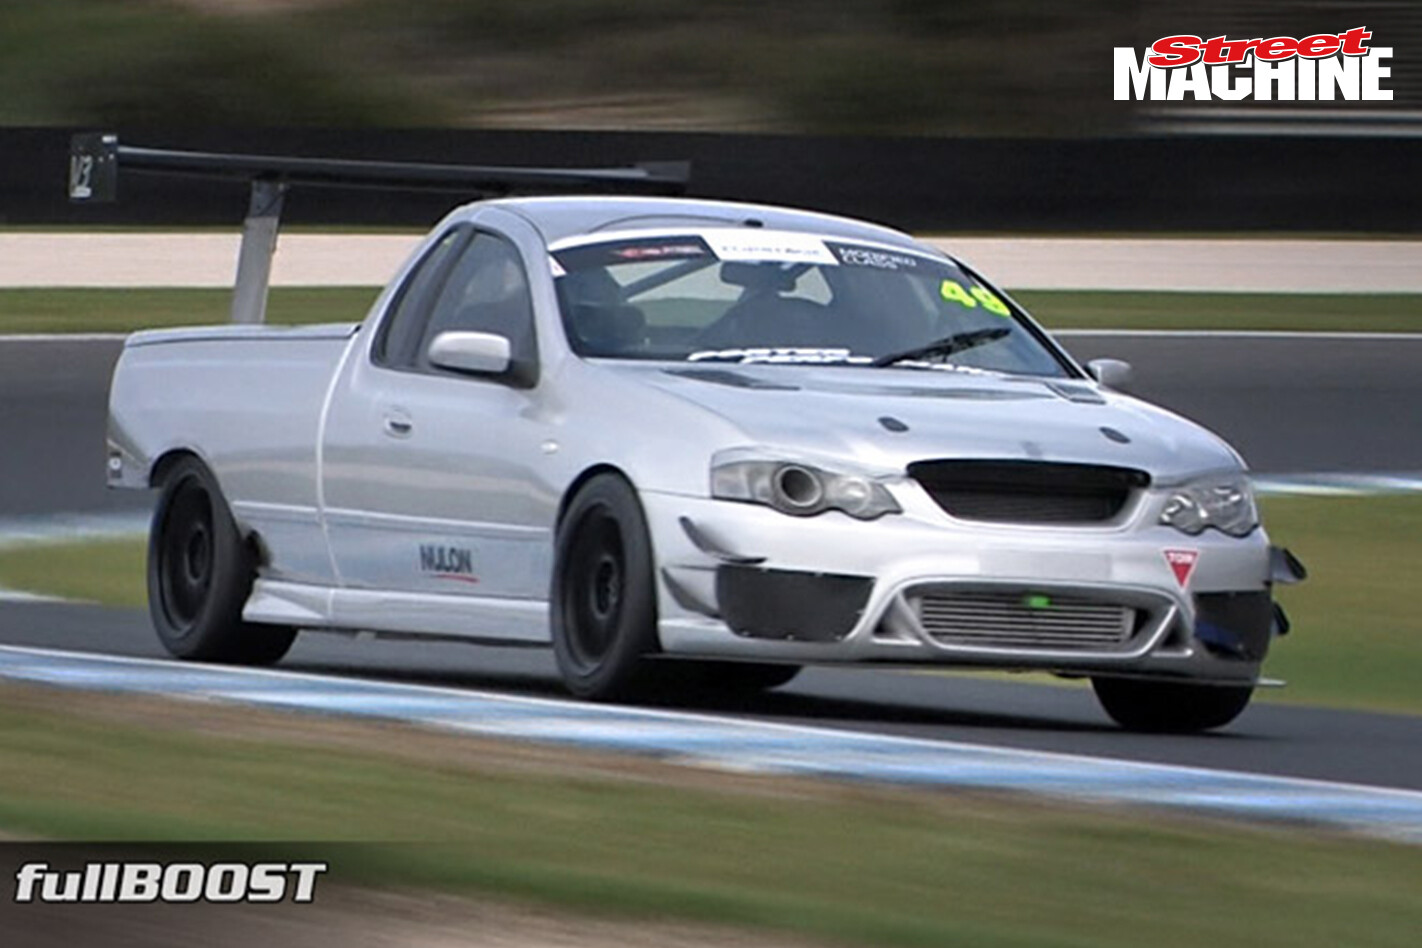 Ford XR6 Turbo Falcon ute time attack car – Video